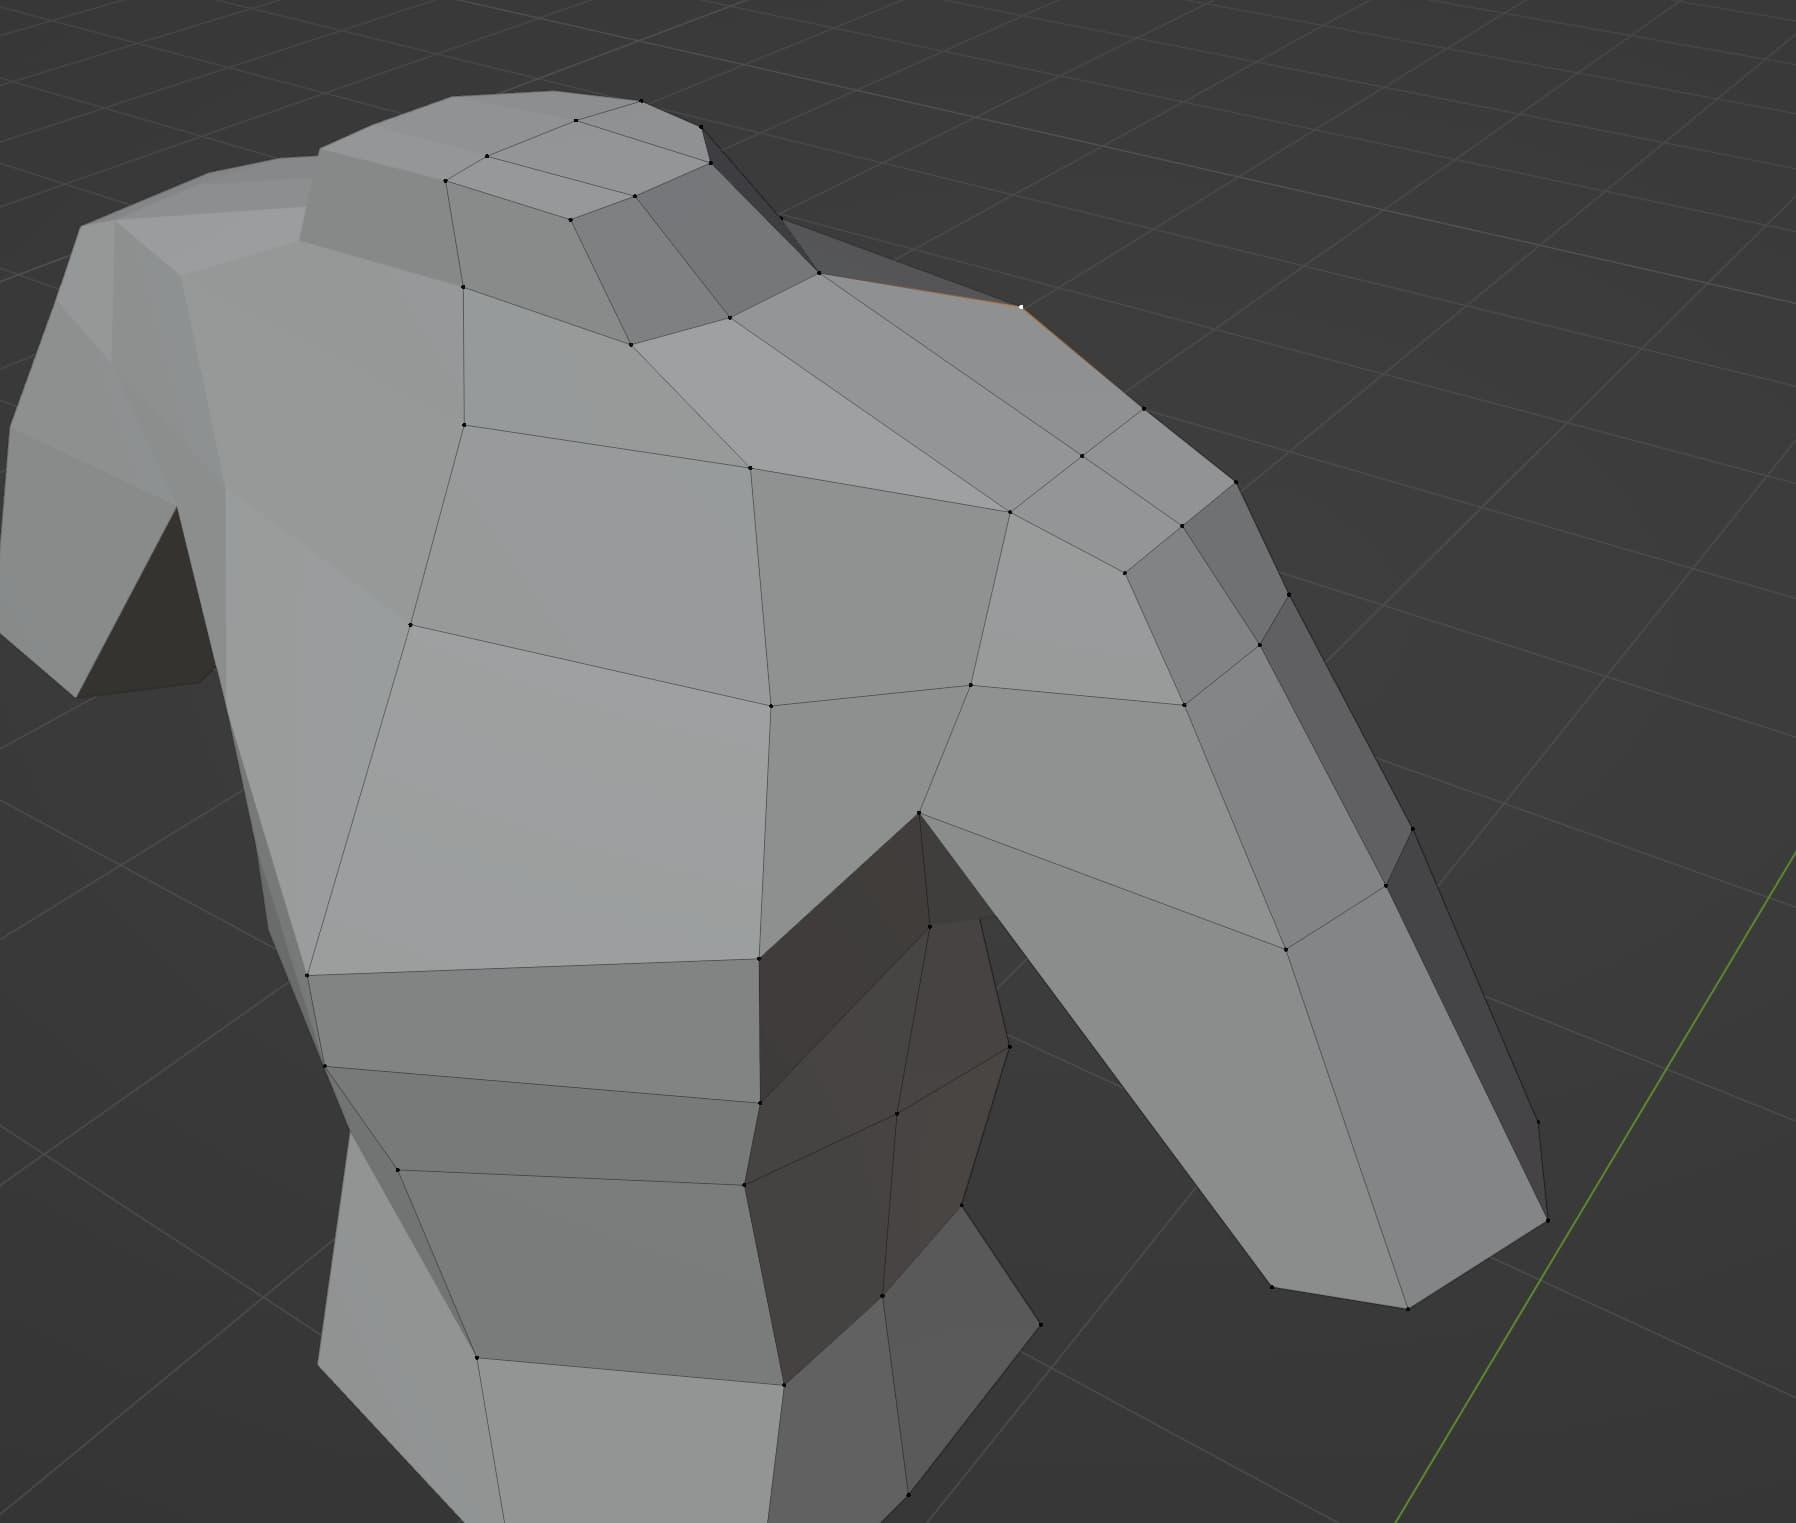 A screenshot of the torso and arms, with no triangles or n-gons to be had - only four-sided shapes